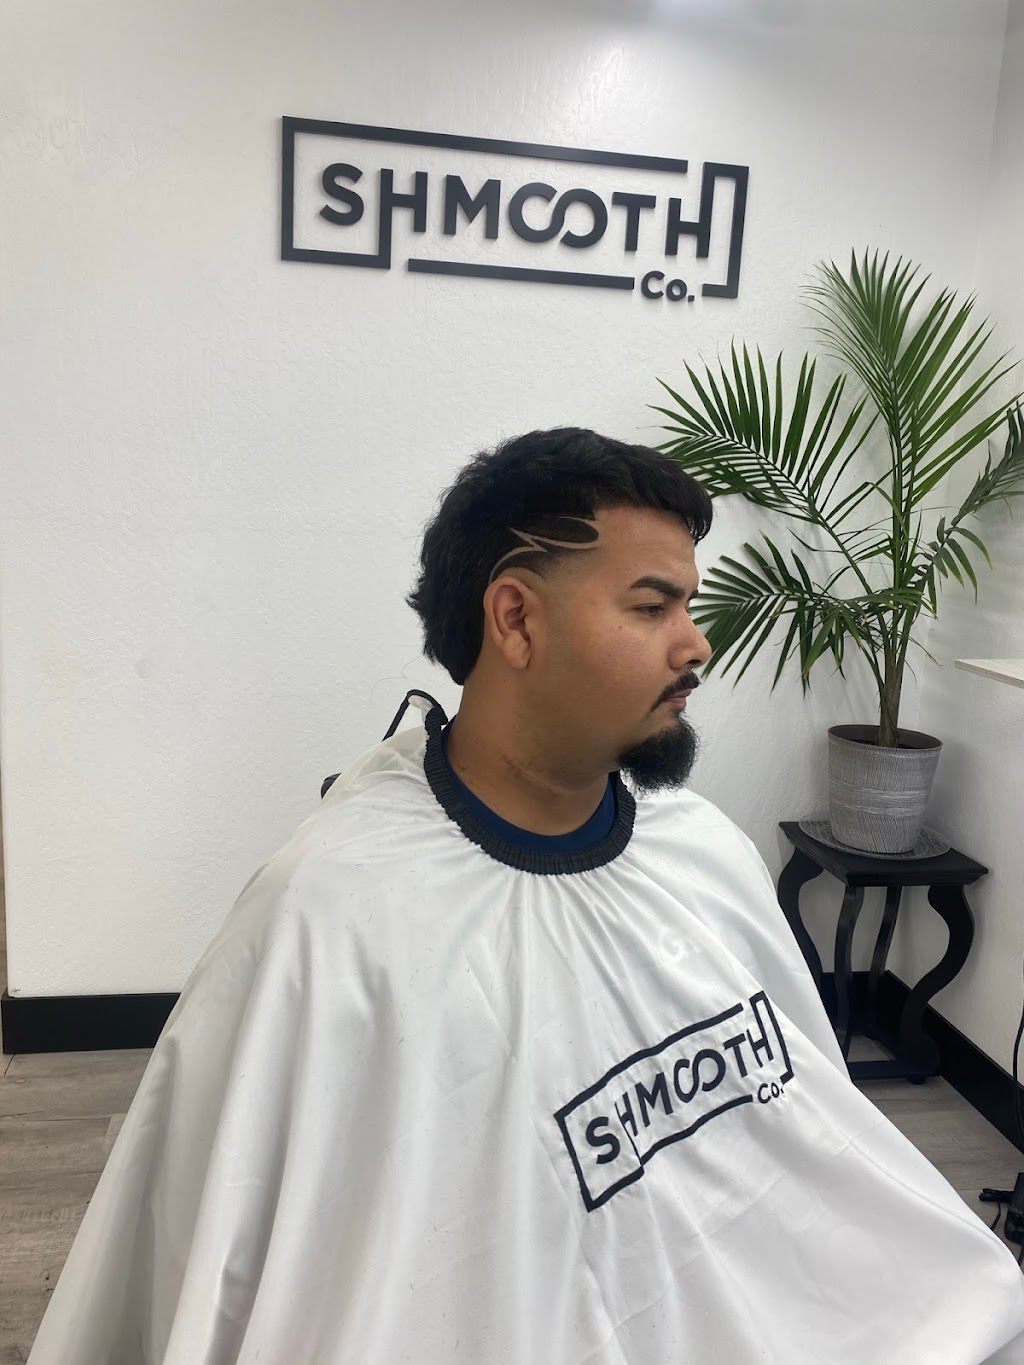 Shmooth Co Barbershop | 1834 Bellevue Rd, Atwater, CA 95301, USA | Phone: (209) 445-0929